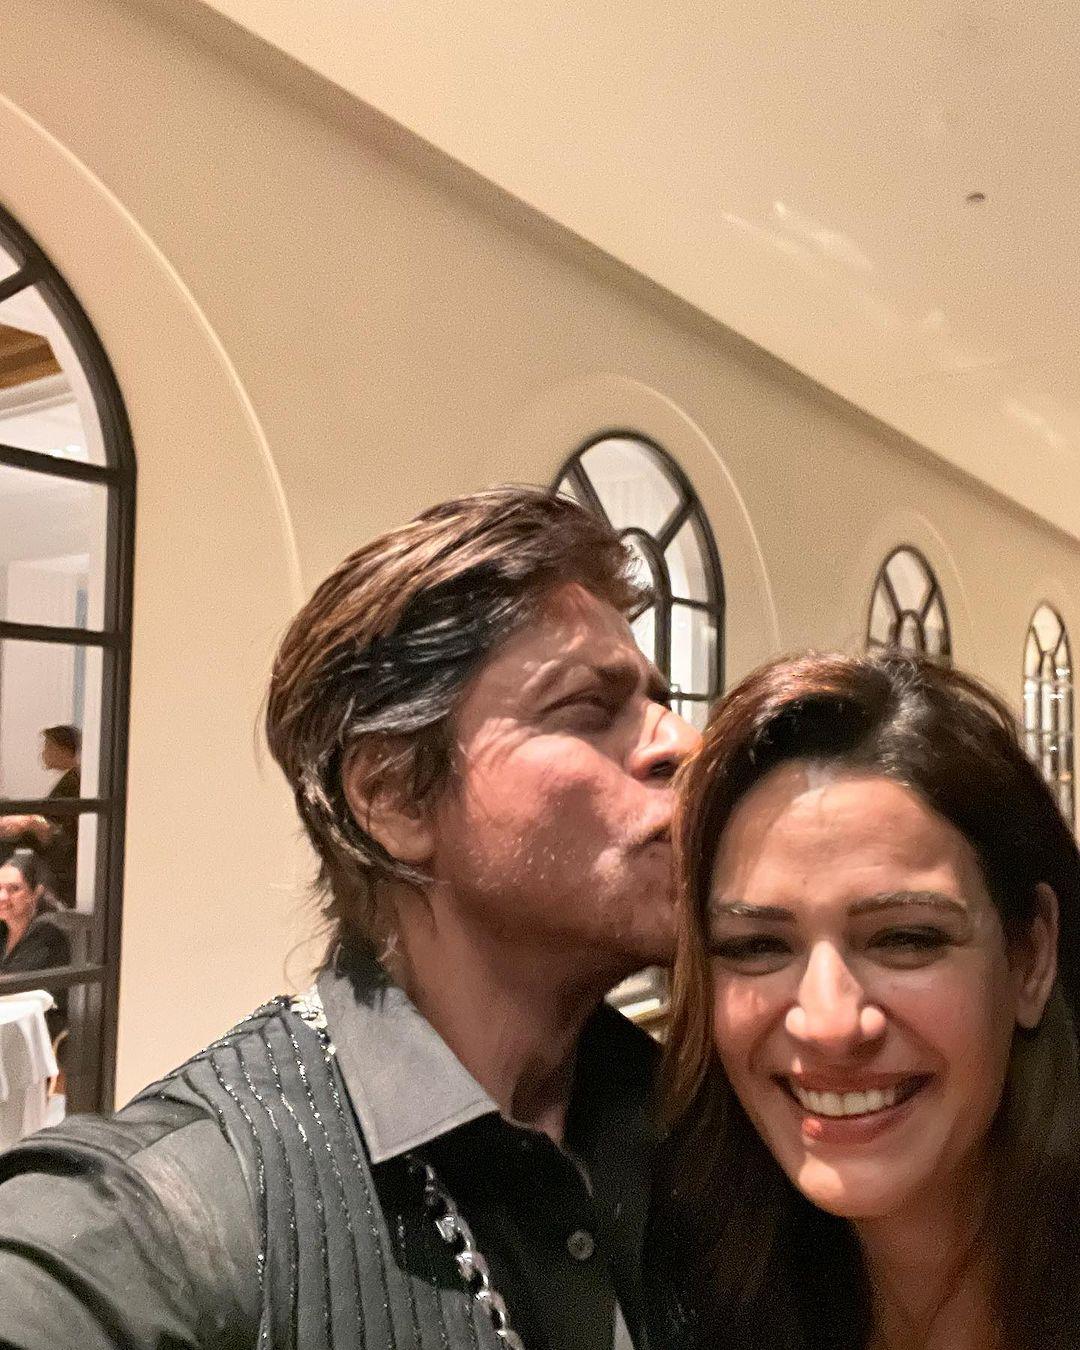 How adorable! King Khan planted a sweet kiss on Mona Singh's head. Our hearts are truly melting